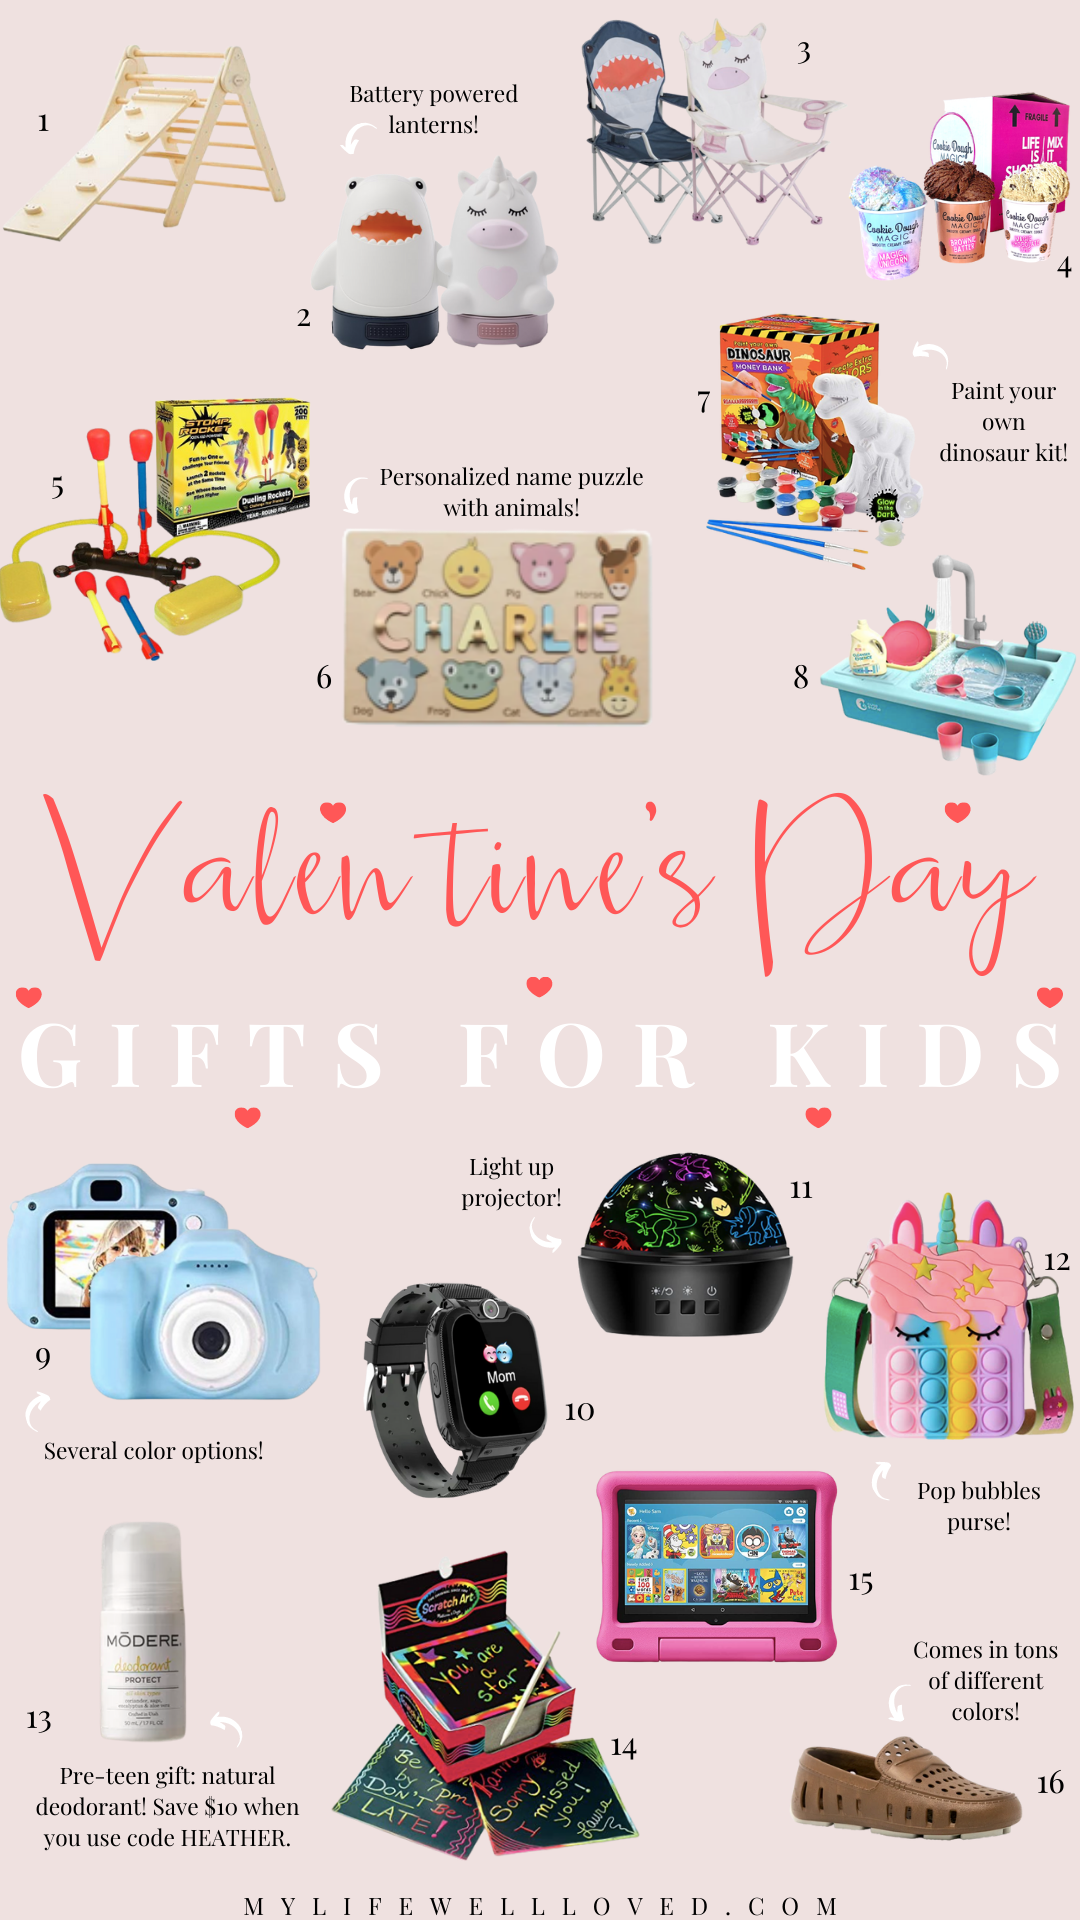 2022 Valentines Day Gift Guide by Alabama mom + lifestyle blogger, Heather Brown // My Life Well Loved